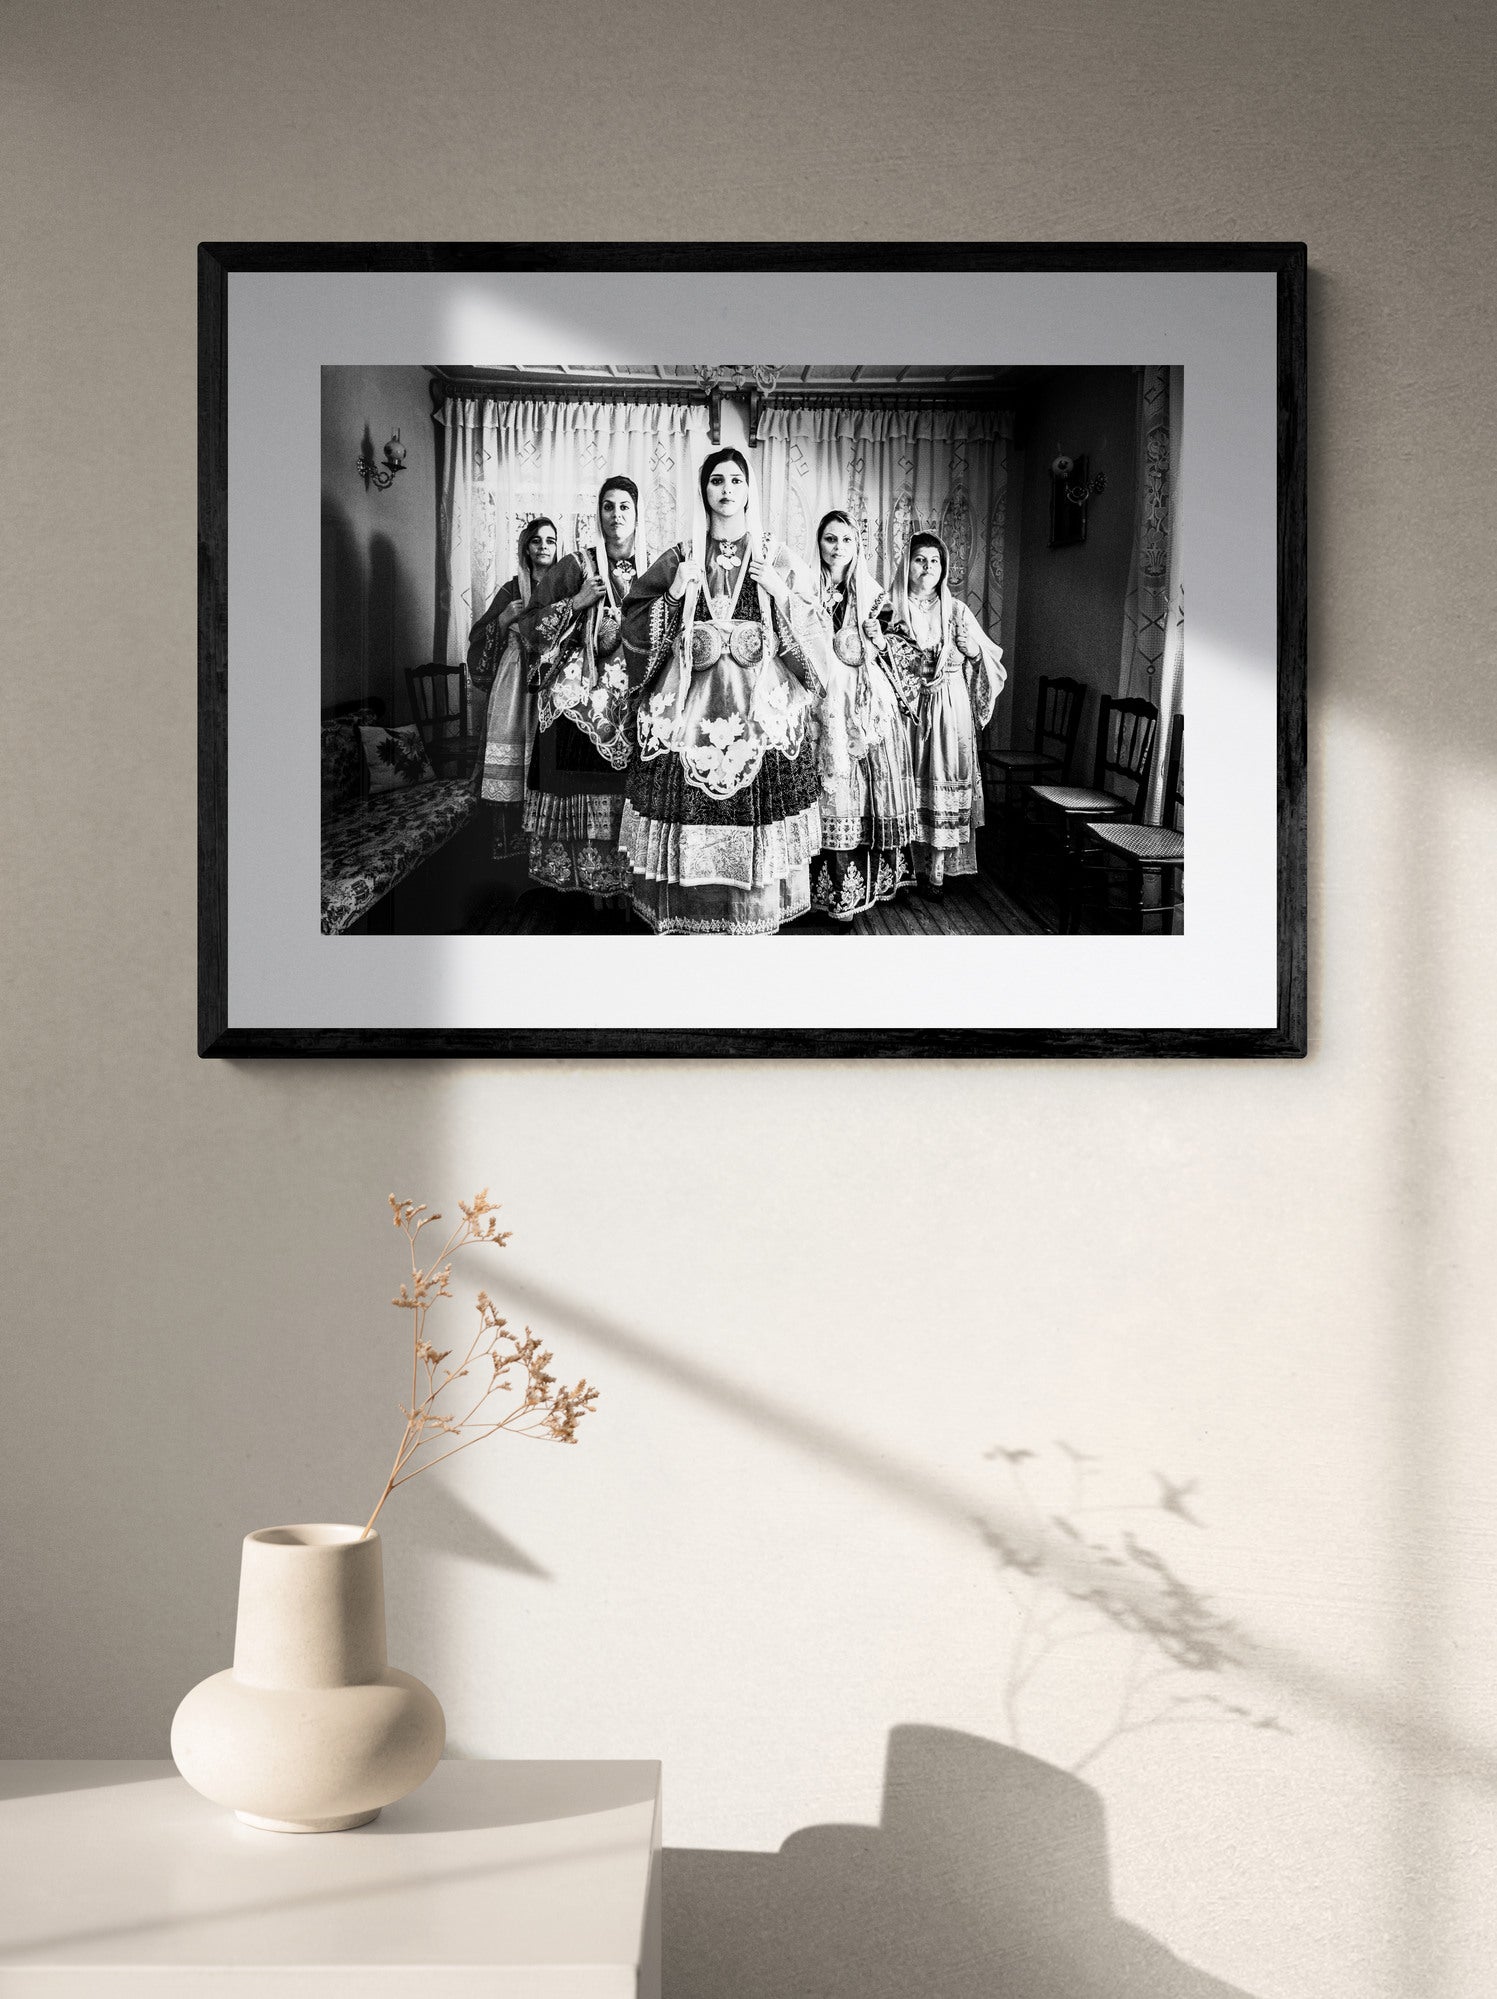 Black and White Photography Wall Art Greece | Trikeri traditional costumes S. Pelion Thessaly by George Tatakis - single framed photo